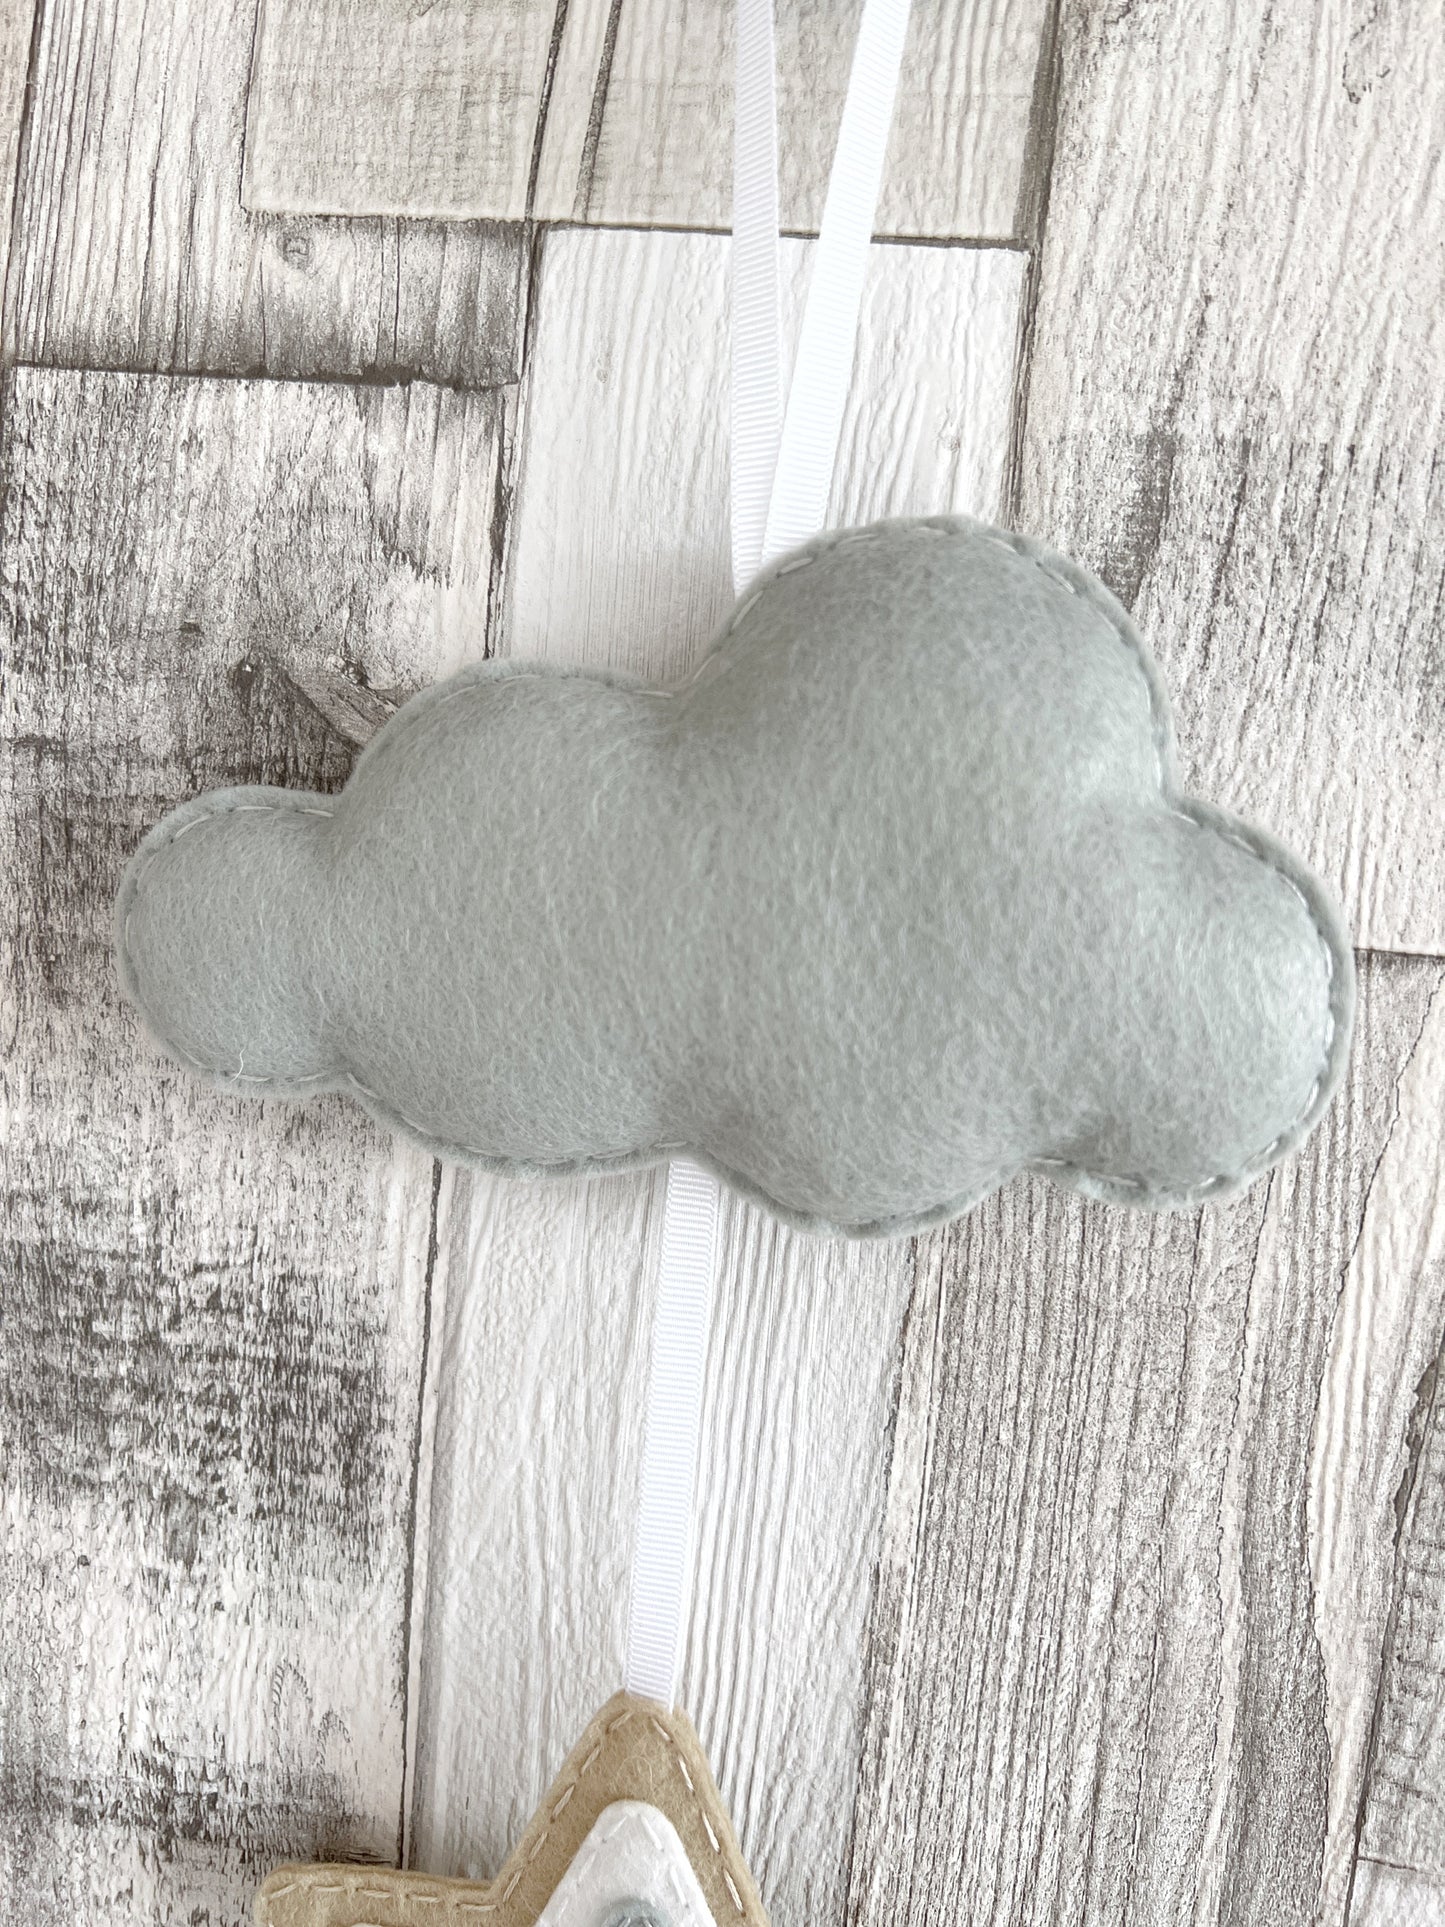 Layered Star & Cloud Wall Hanger - Beige, Cream & Grey - READY TO POST